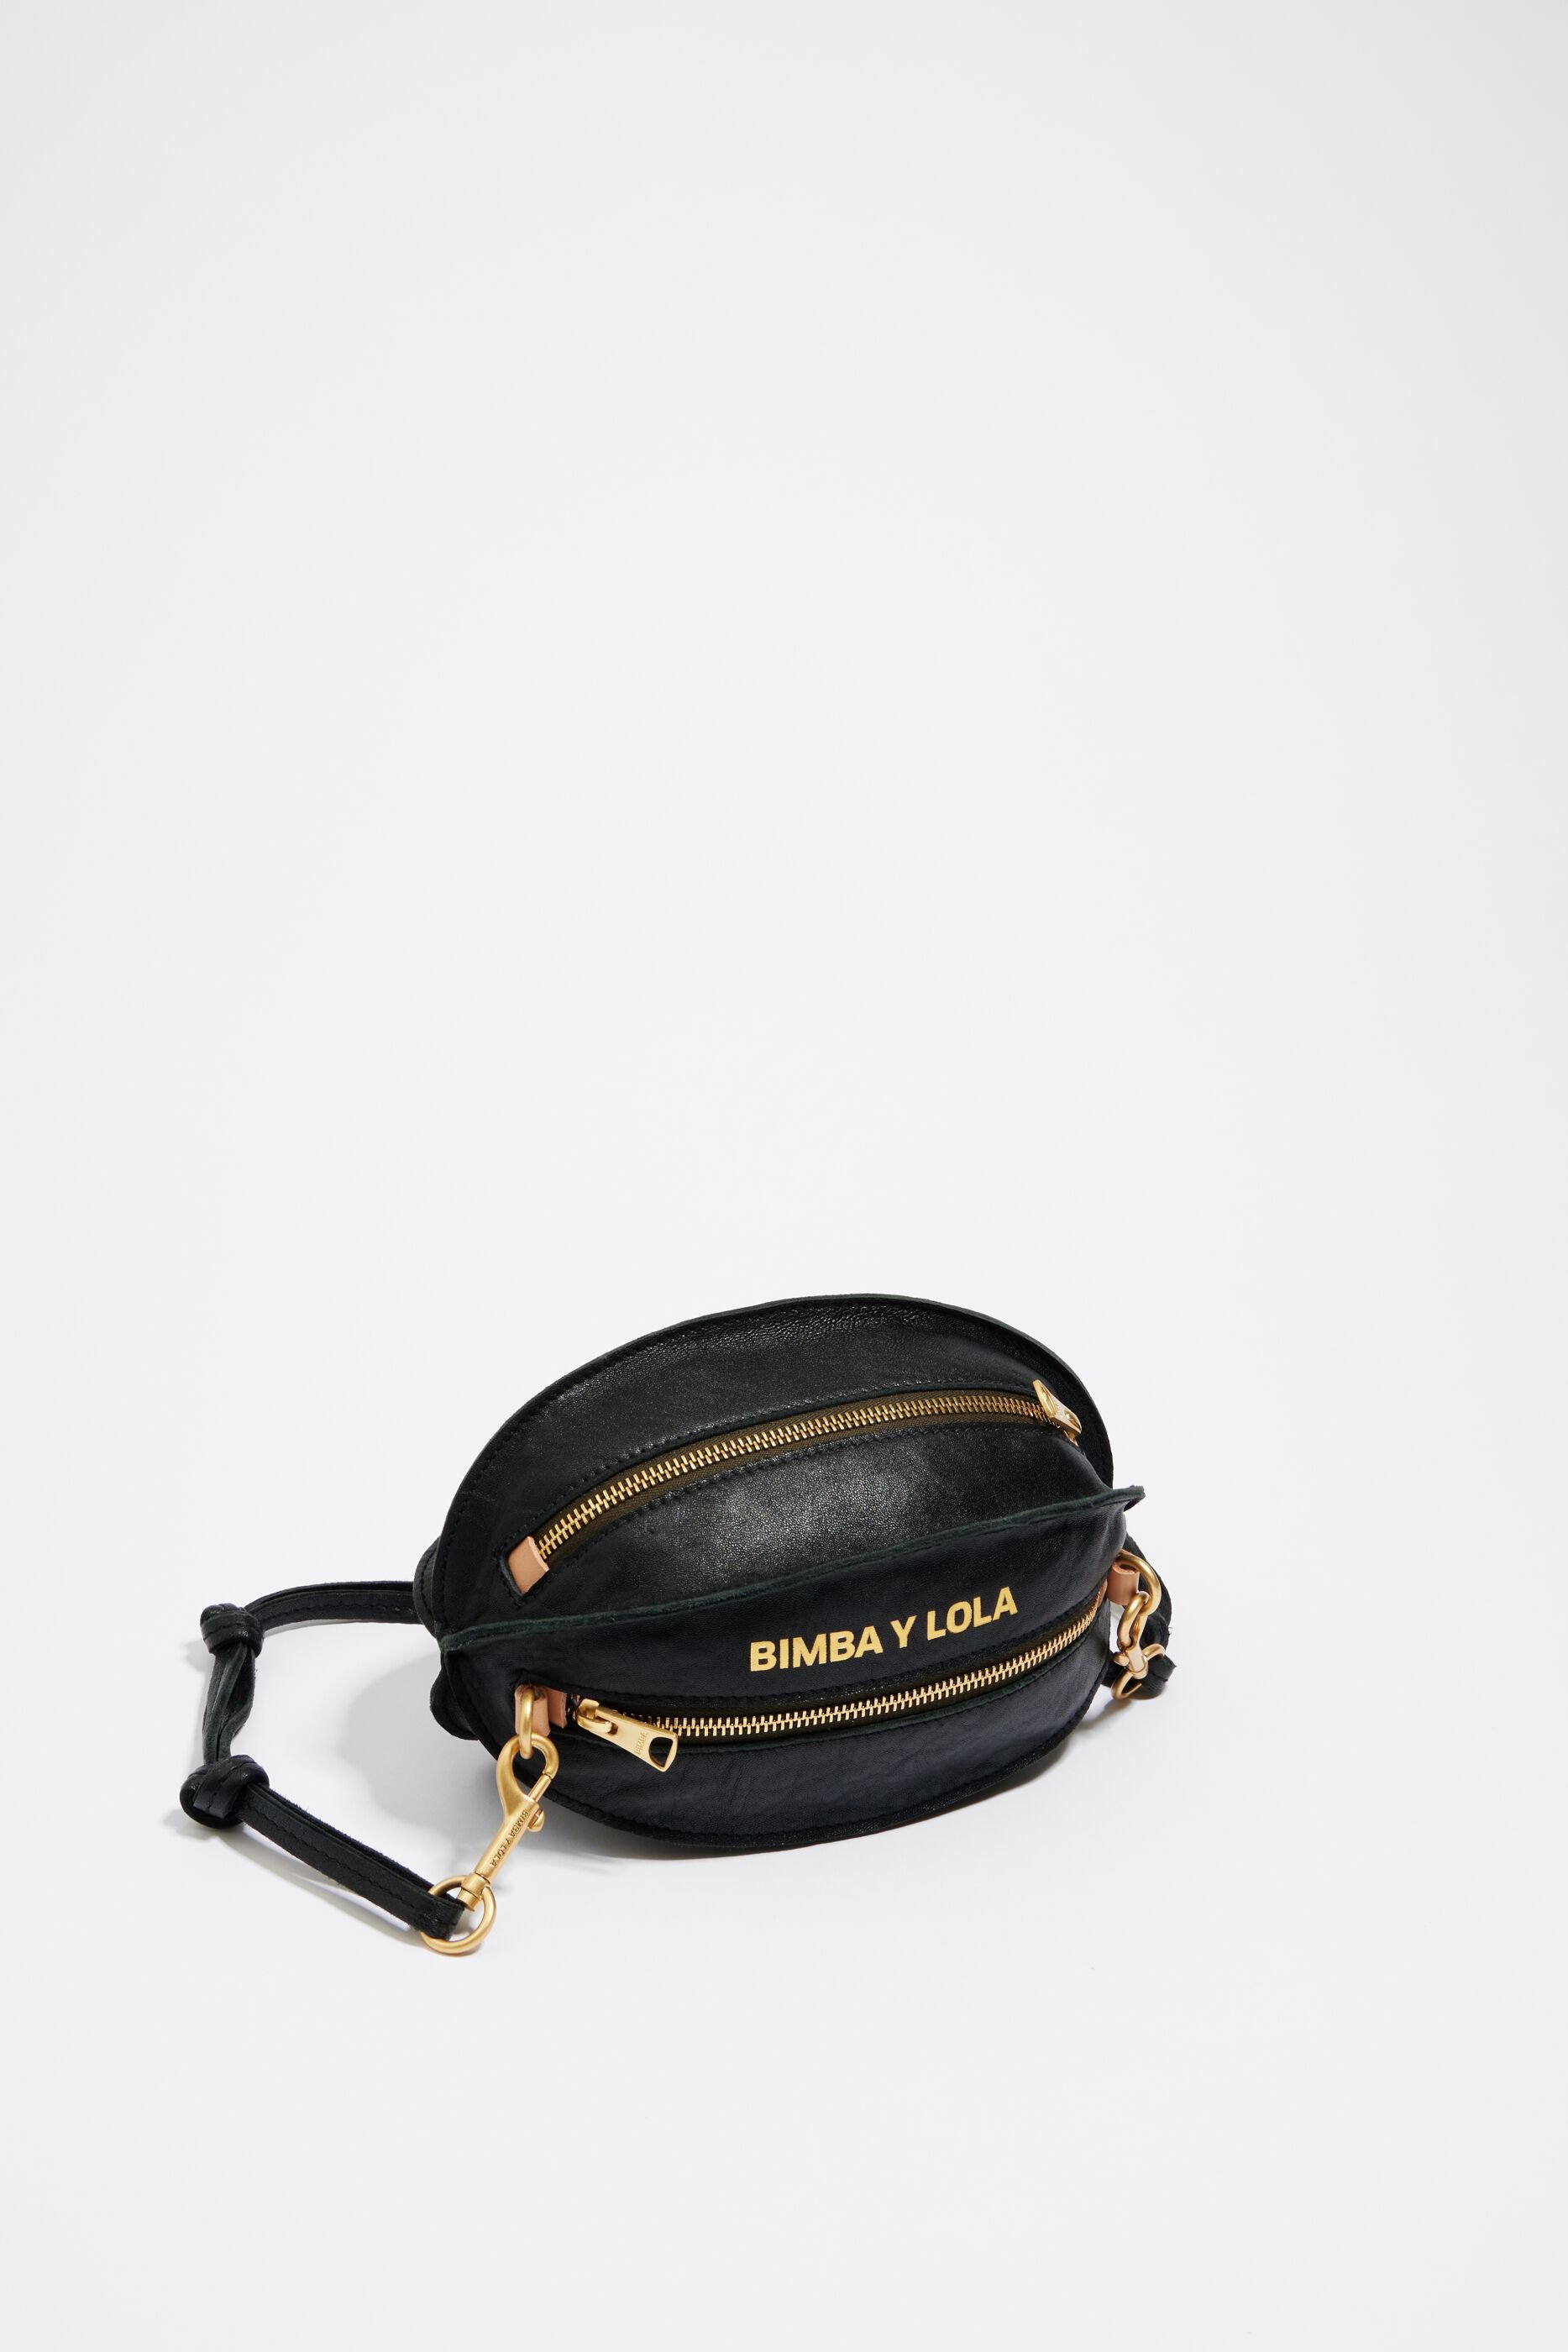 BIMBA Y LOLA United States | Official Online Shop